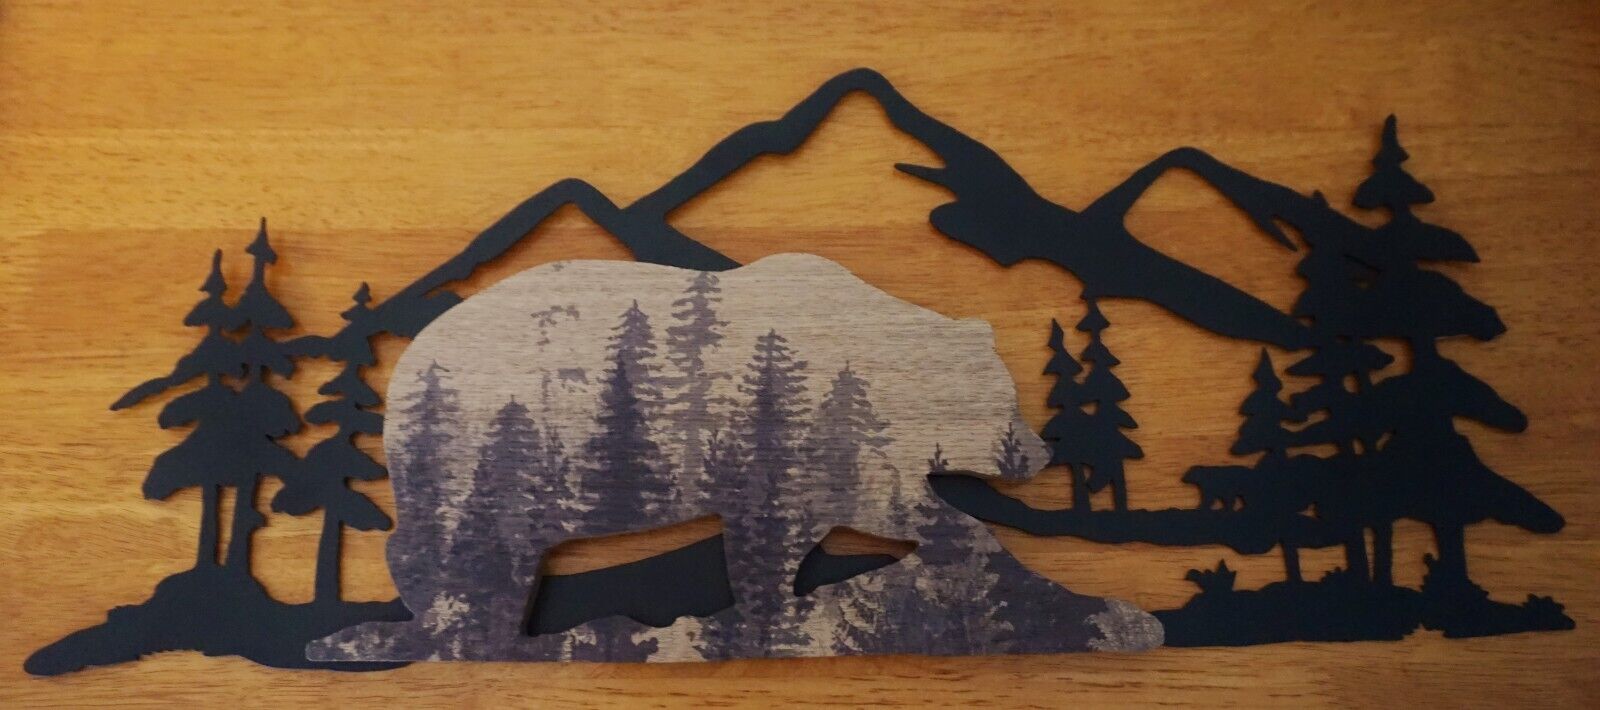 WOOD BEAR FOREST METAL MOUNTAIN SCULPTURE SIGN Rustic Lodge Cabin Home Decor NEW